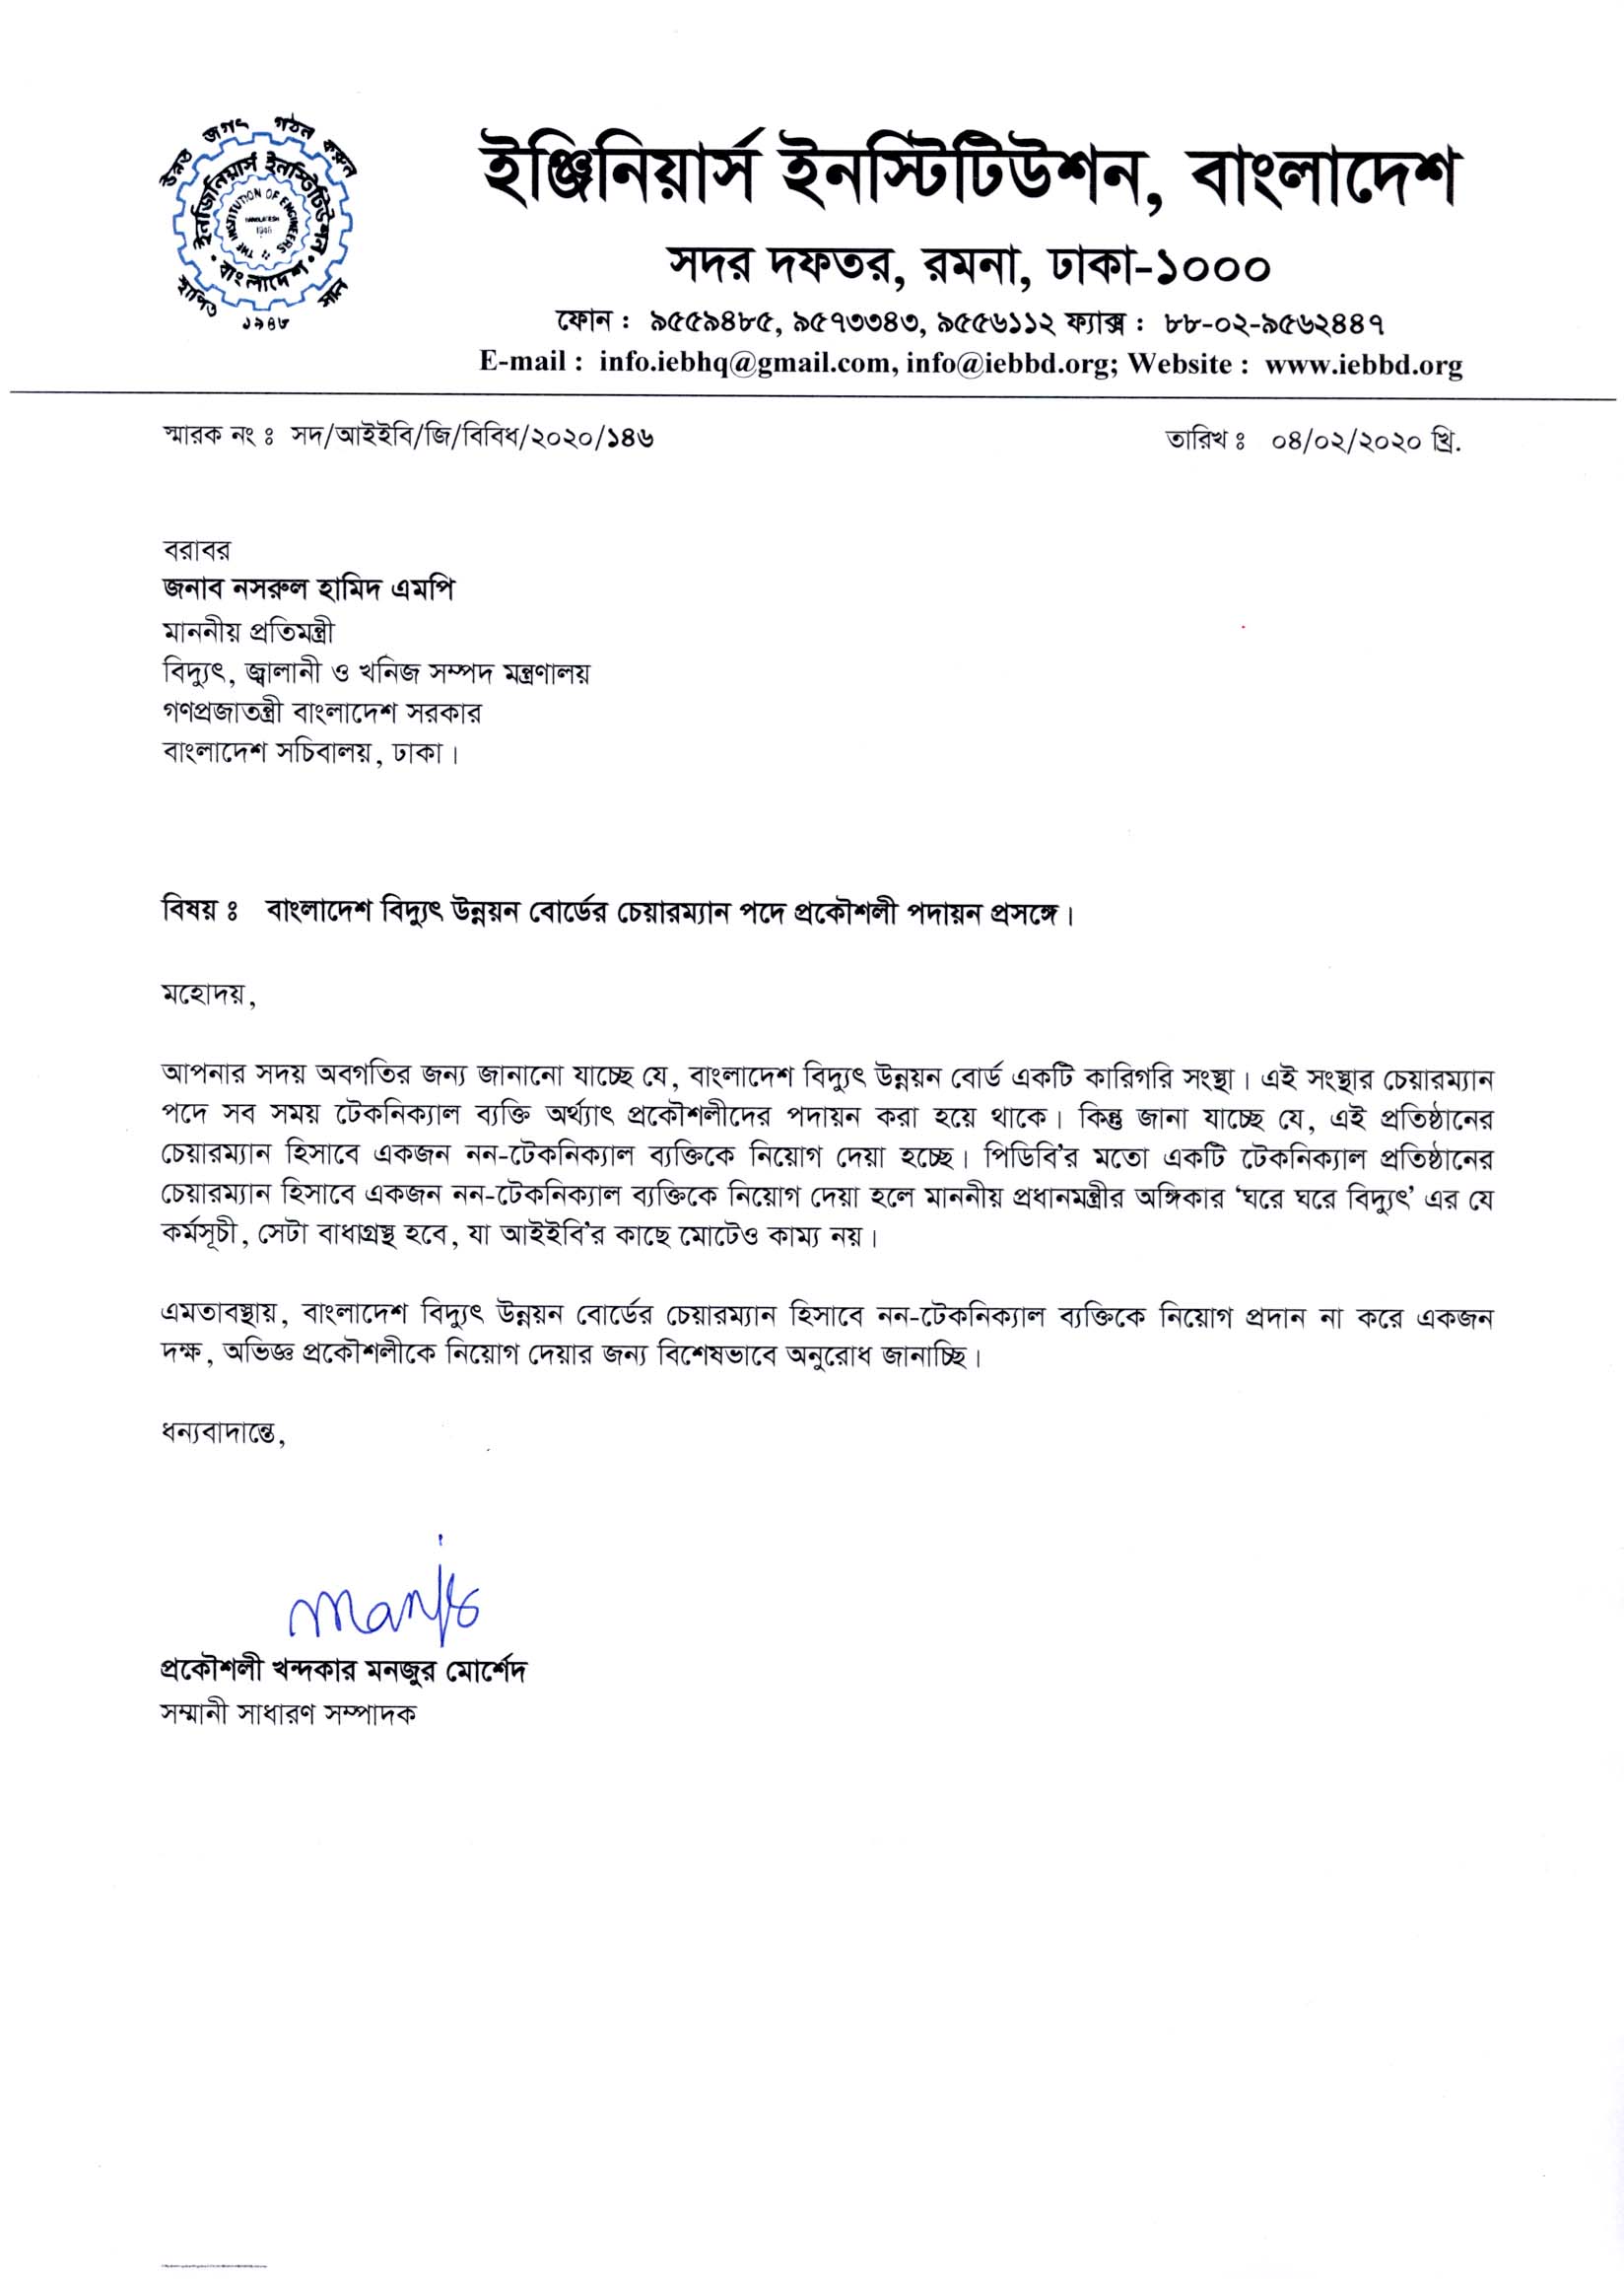 Issuing a letter by the IEB regarding the appointment of Engineer to the post of Chairman of BPDB